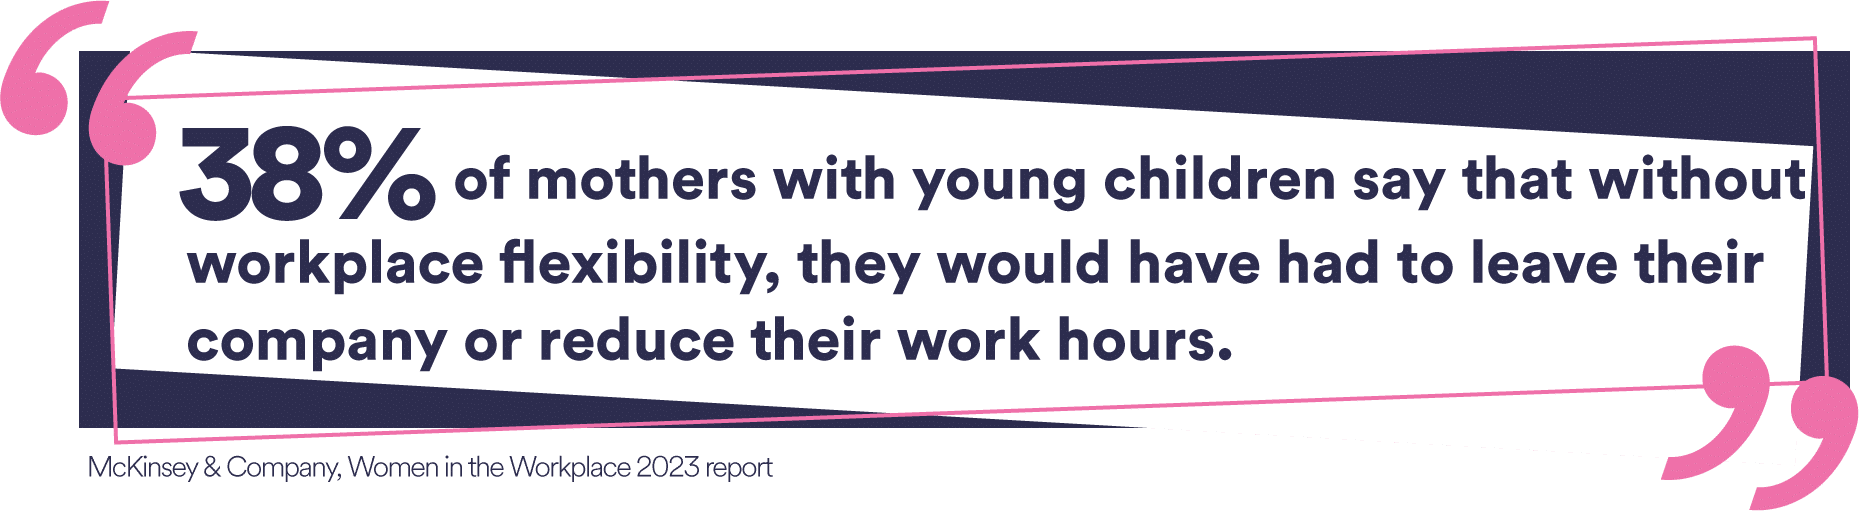 “38 percent of mothers with young children say that without workplace flexibility, they would have had to leave their company or reduce their work hours.” (McKinsey & Company, Women in the Workplace 2023 report). 